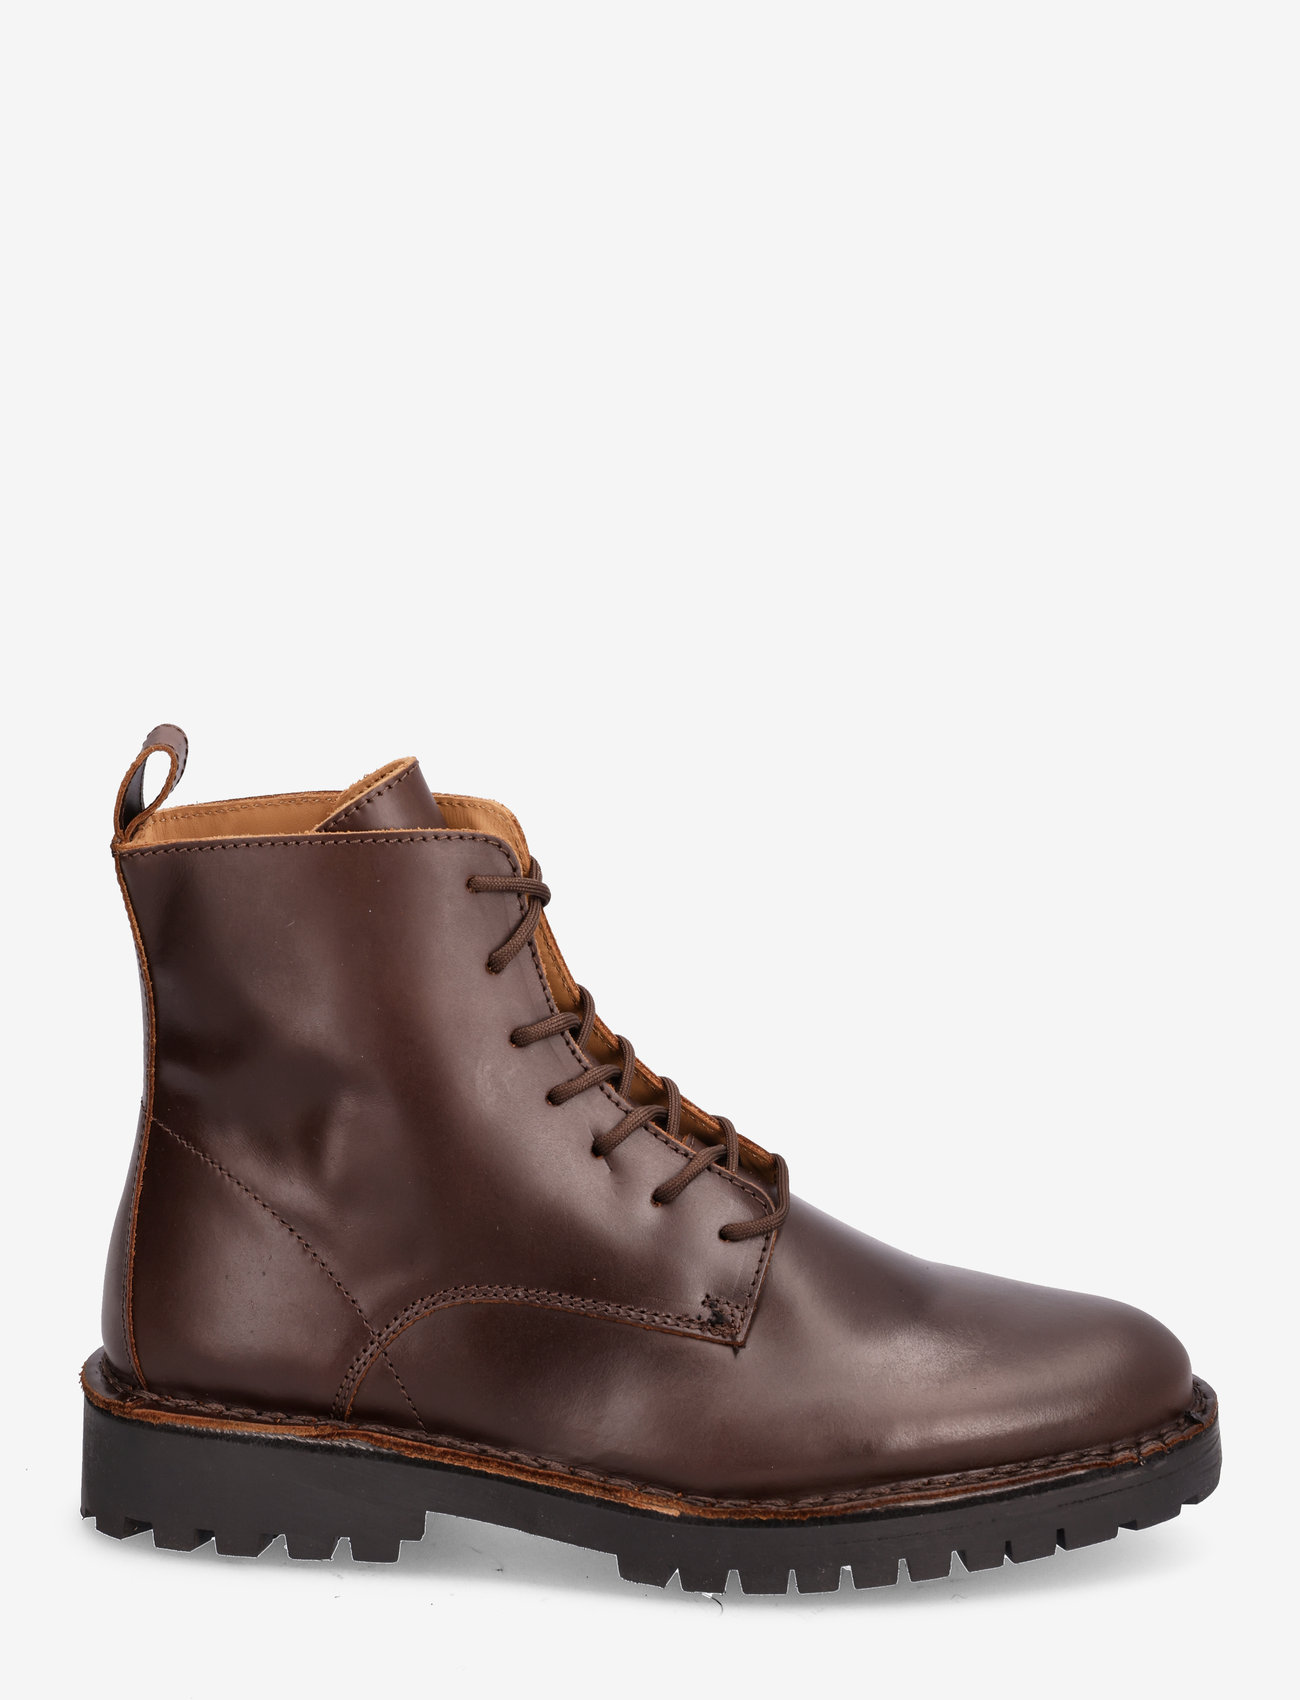 Selected Homme - SLHRICKY LEATHER LACE-UP BOOT - med snøring - demitasse - 1